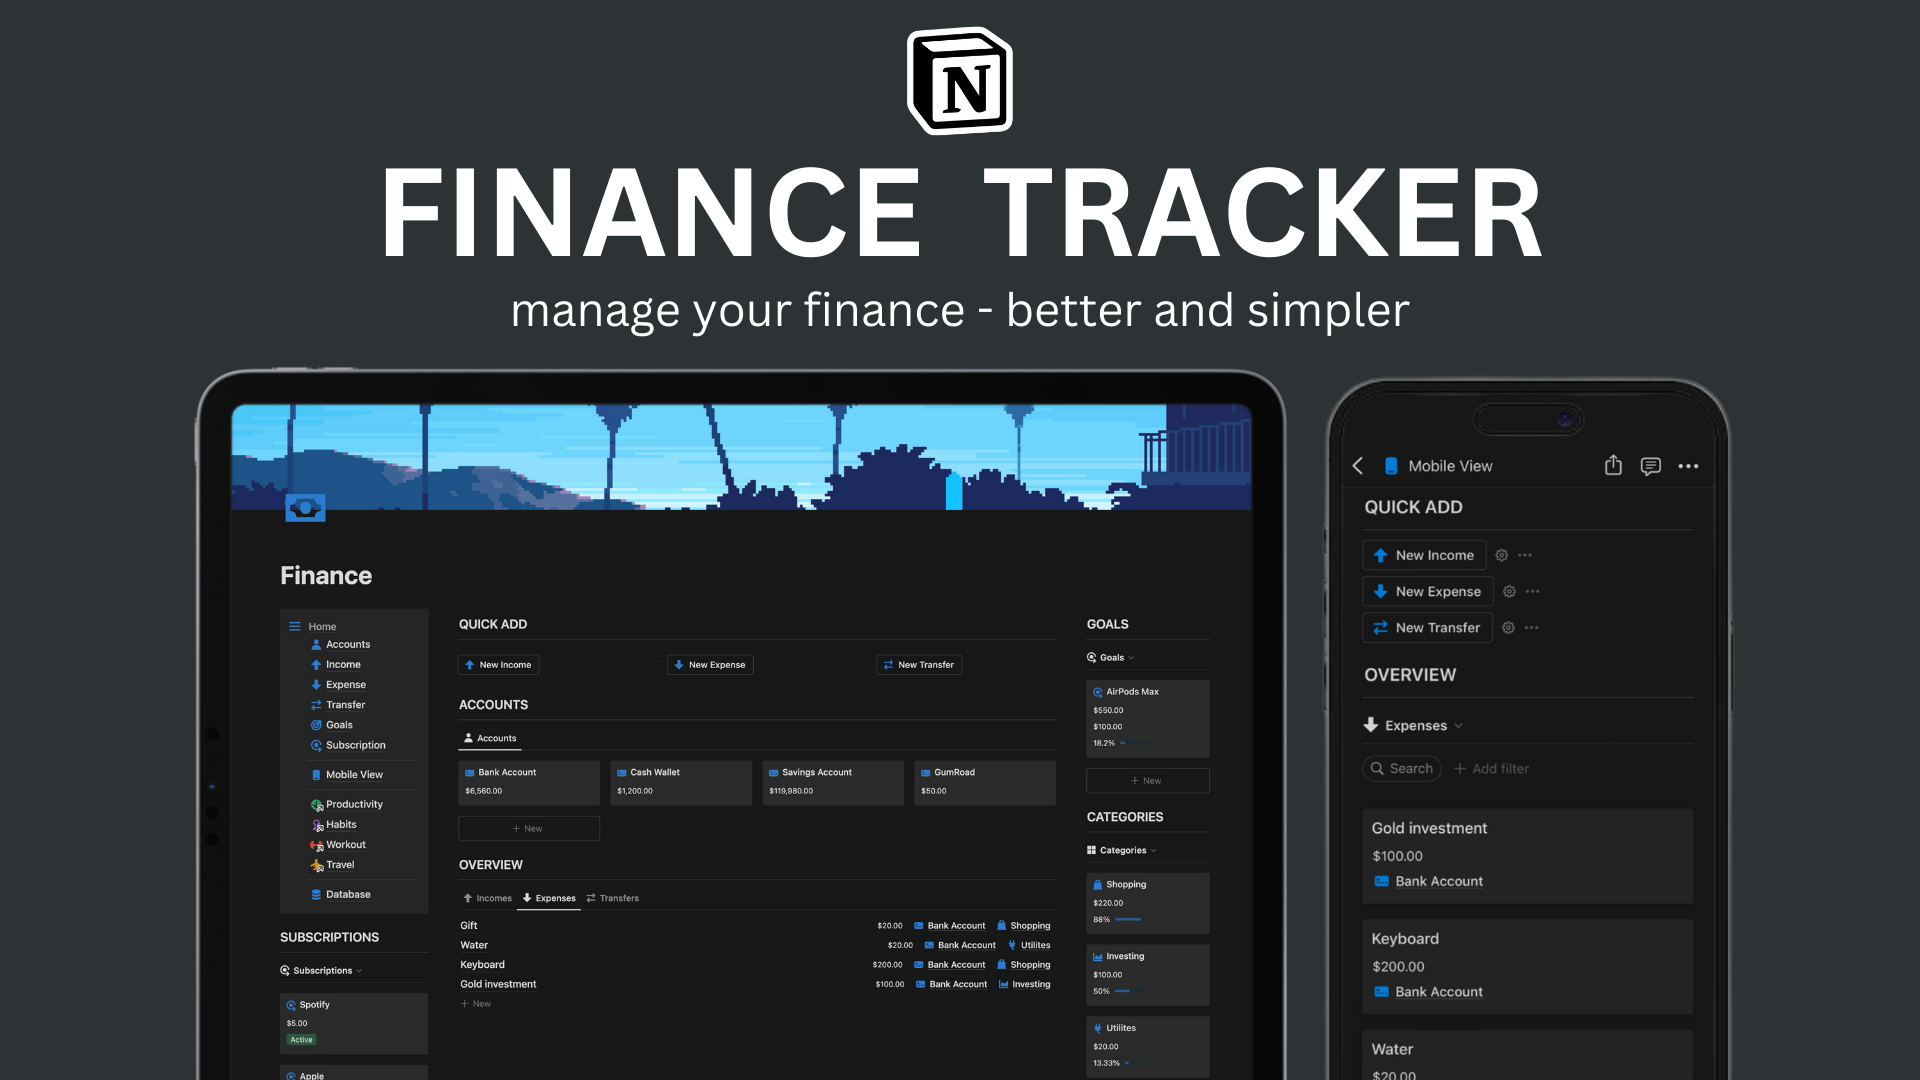 A tracker for managing your finance. Better and simpler.